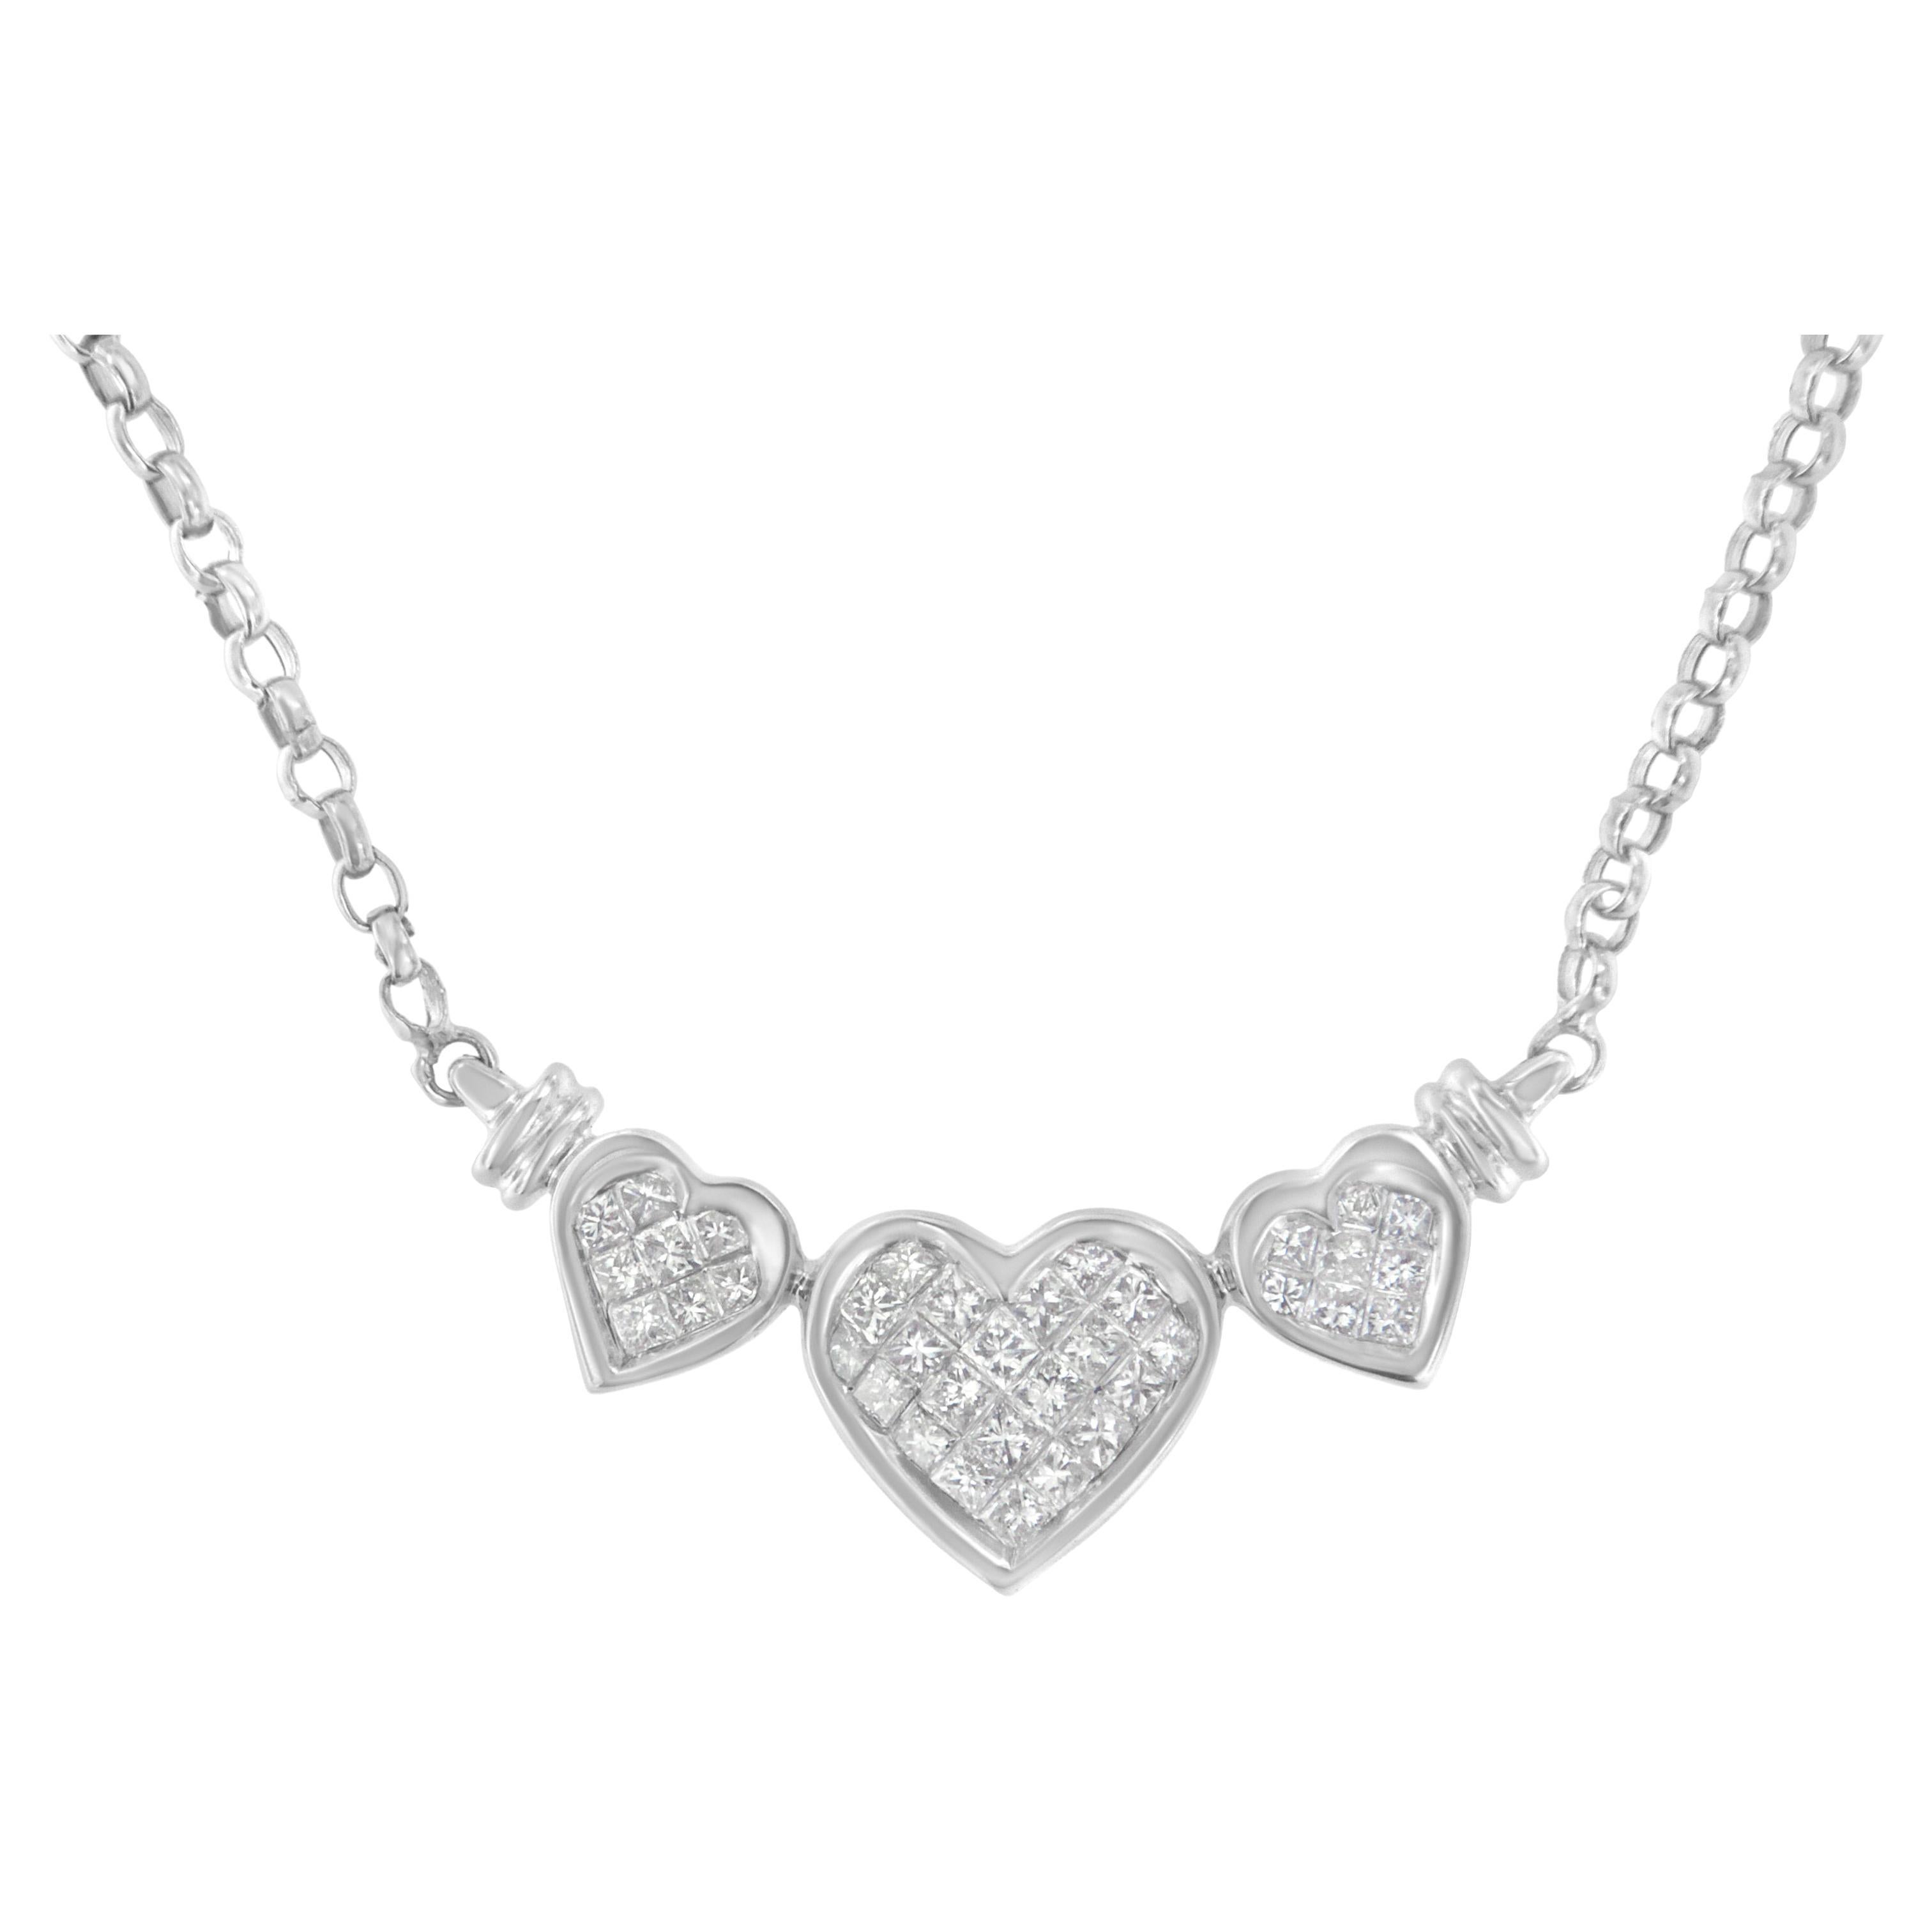 14K White Gold 1.00 Carat Diamond Triple Heart Link Necklace with Box Chain For Sale